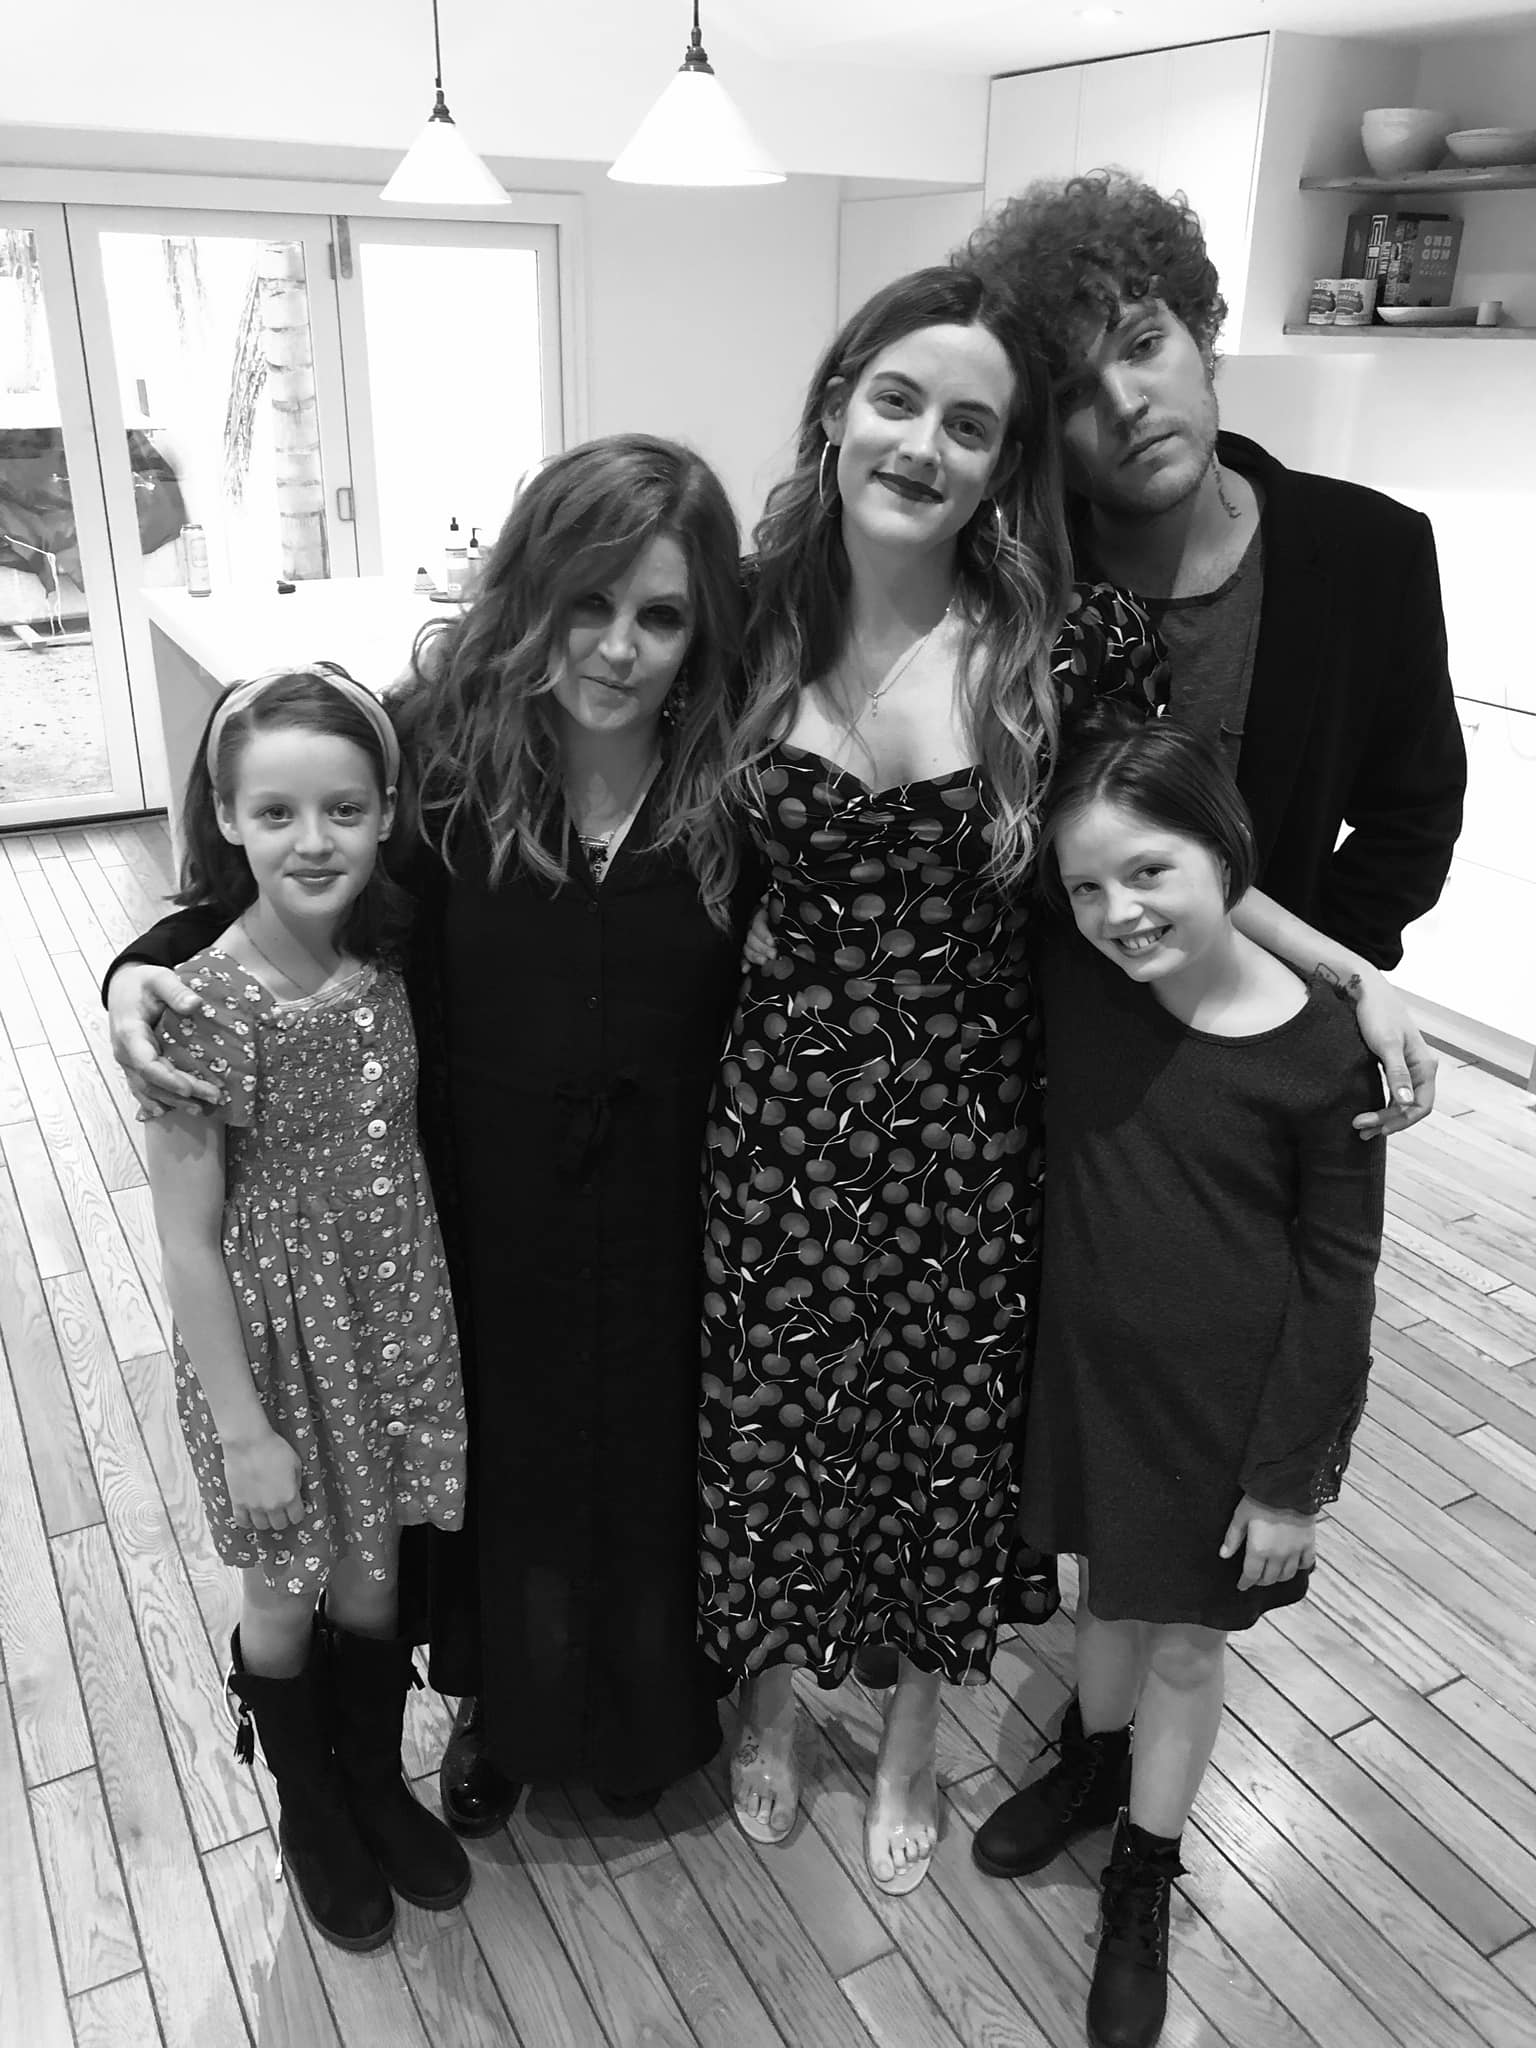 Lisa Marie Presley's twin daughters Harper and Finley Lockwood appear in a photo with their mom, sister Riley, and brother Benjamin in 2019